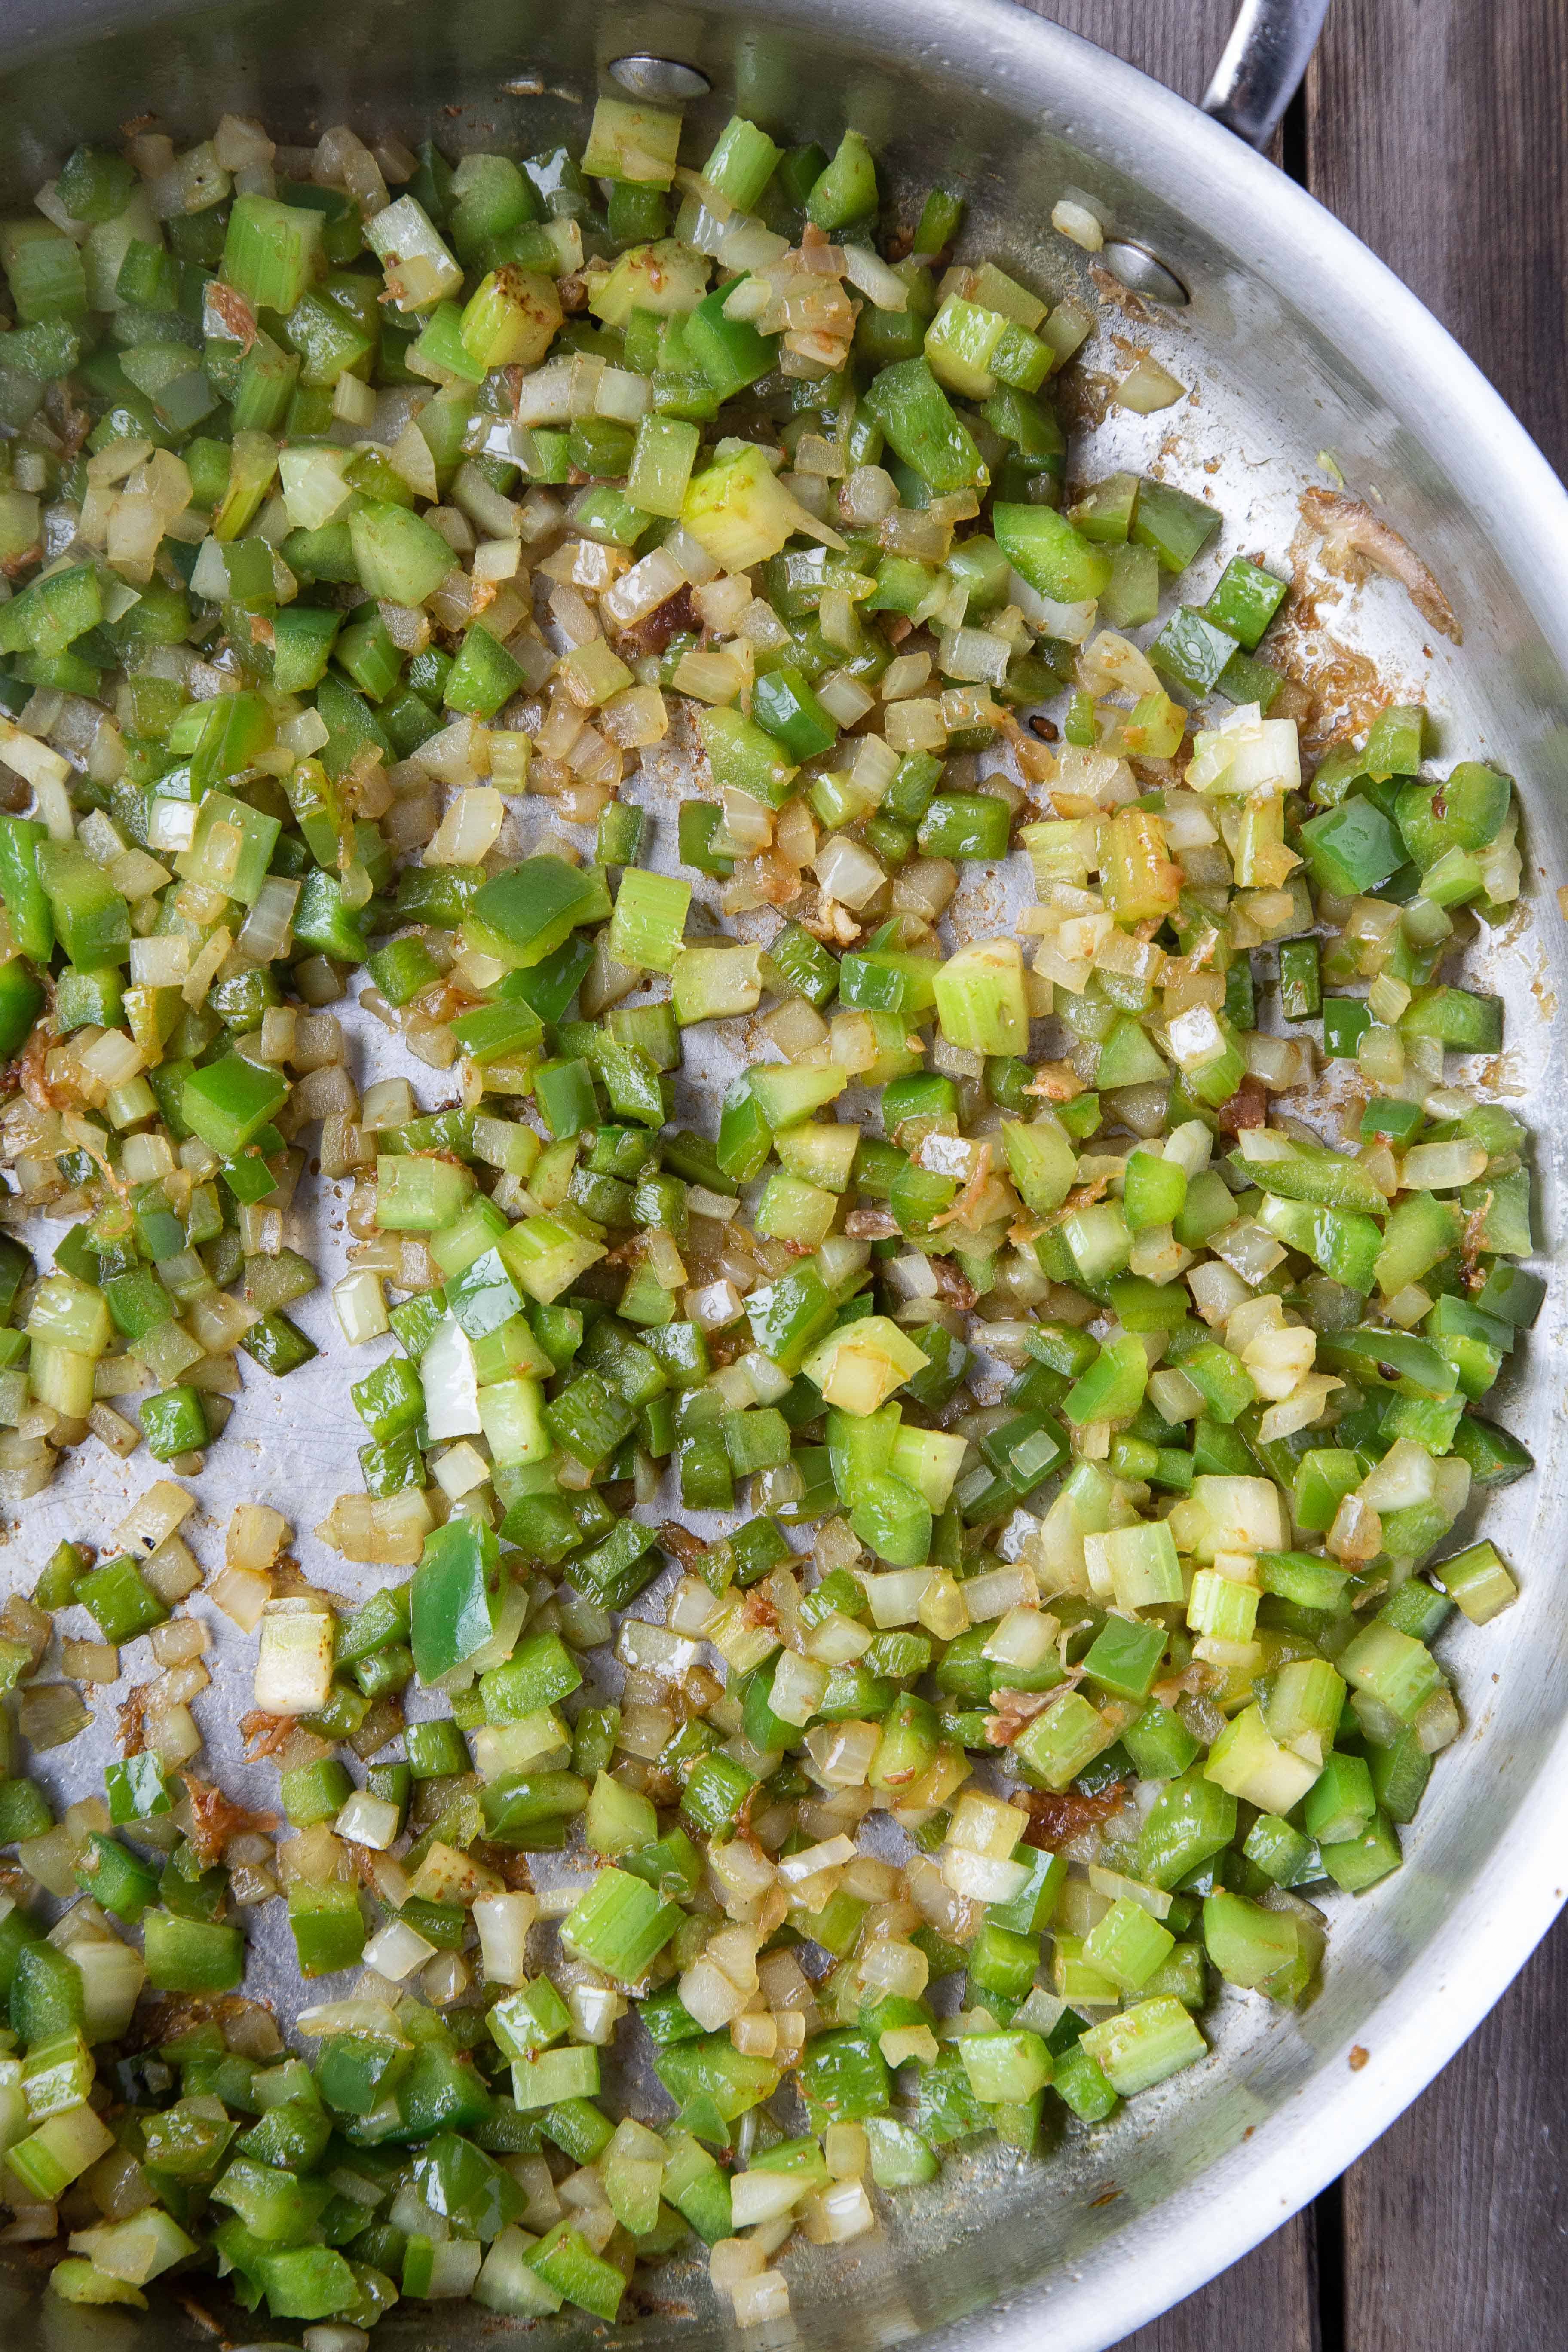 holy trinity of onion, green pepper, and celery sautéing in a large pan